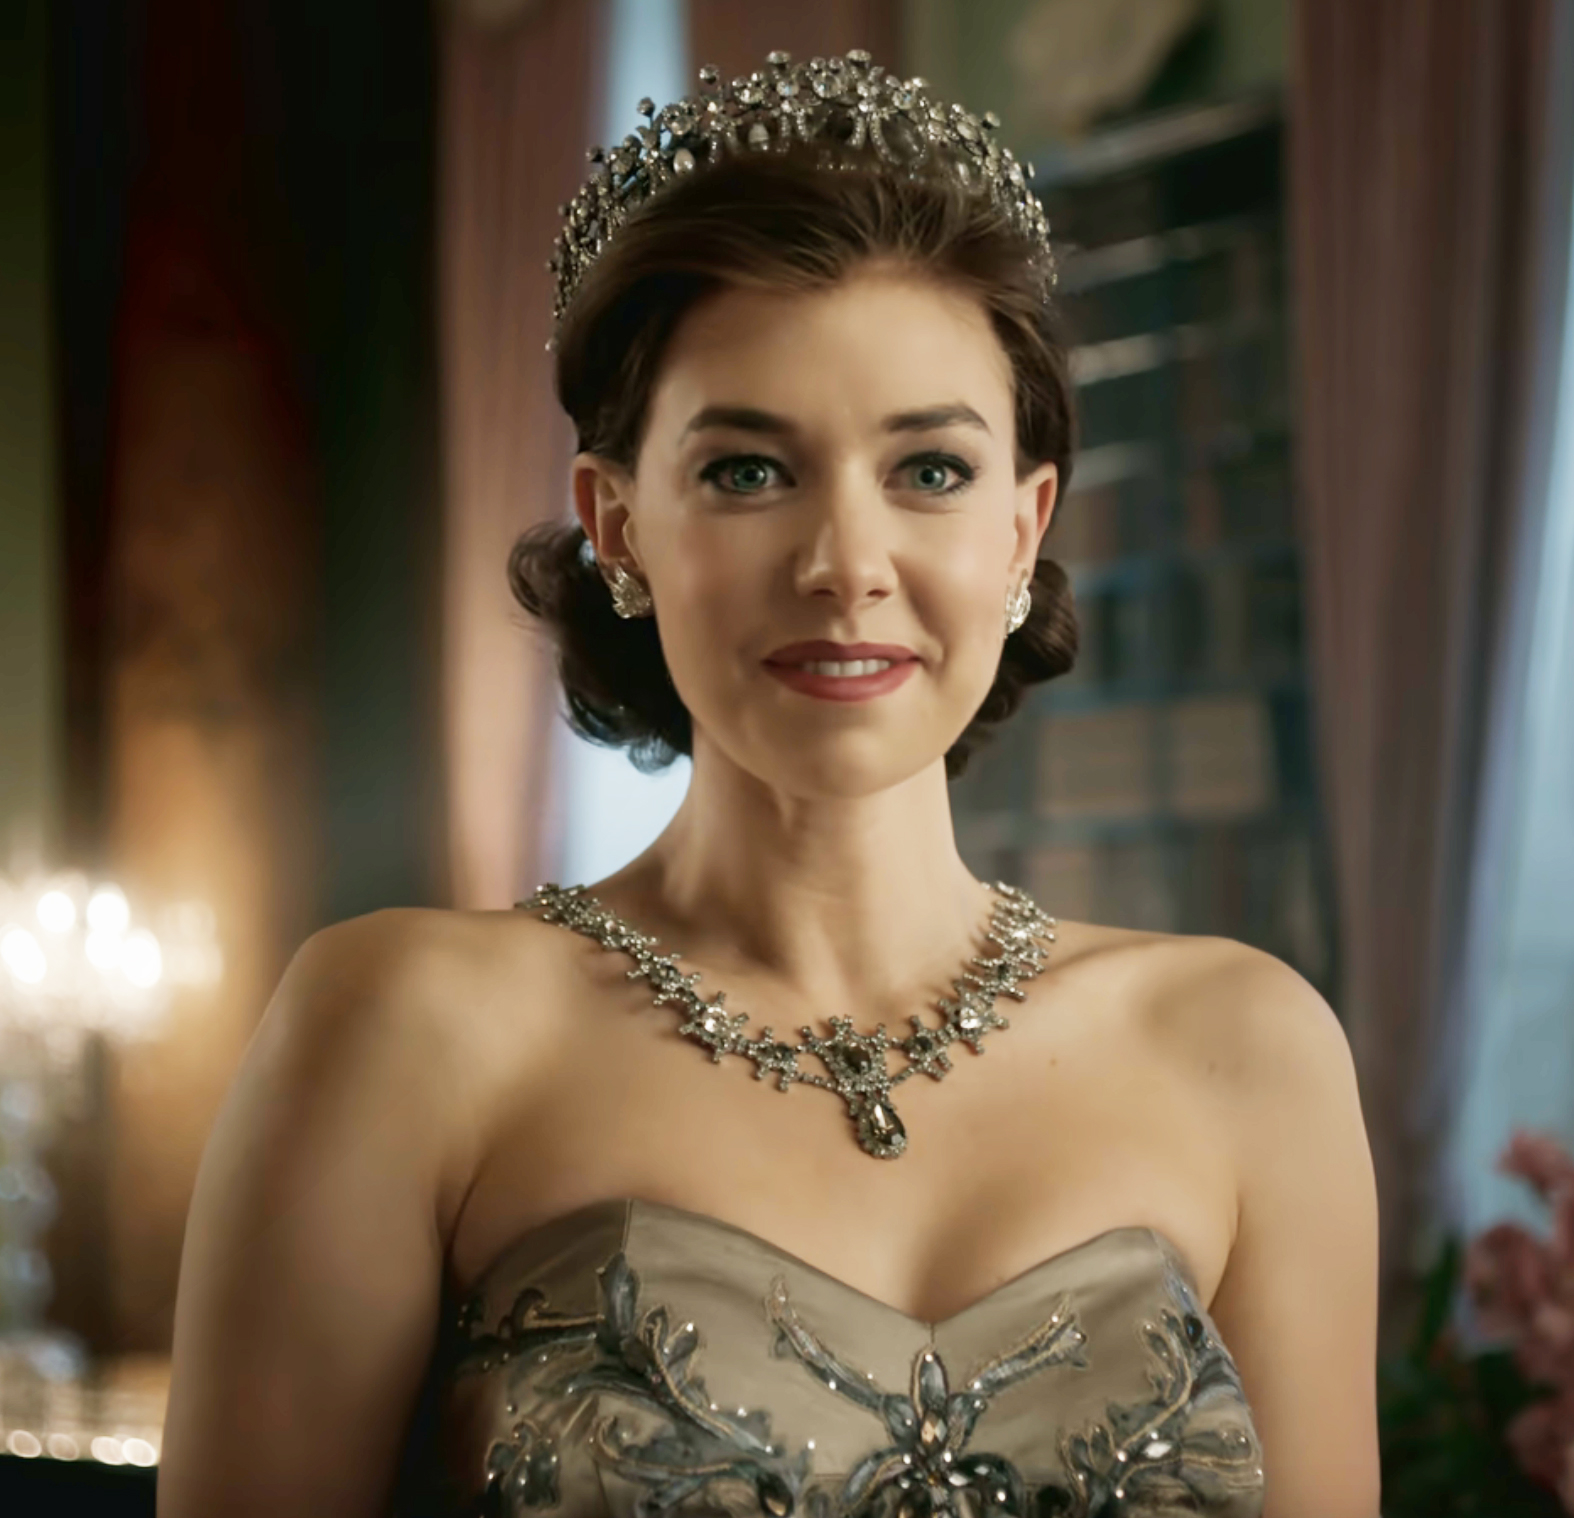 Vanessa wearing a crown and bejeweled necklace